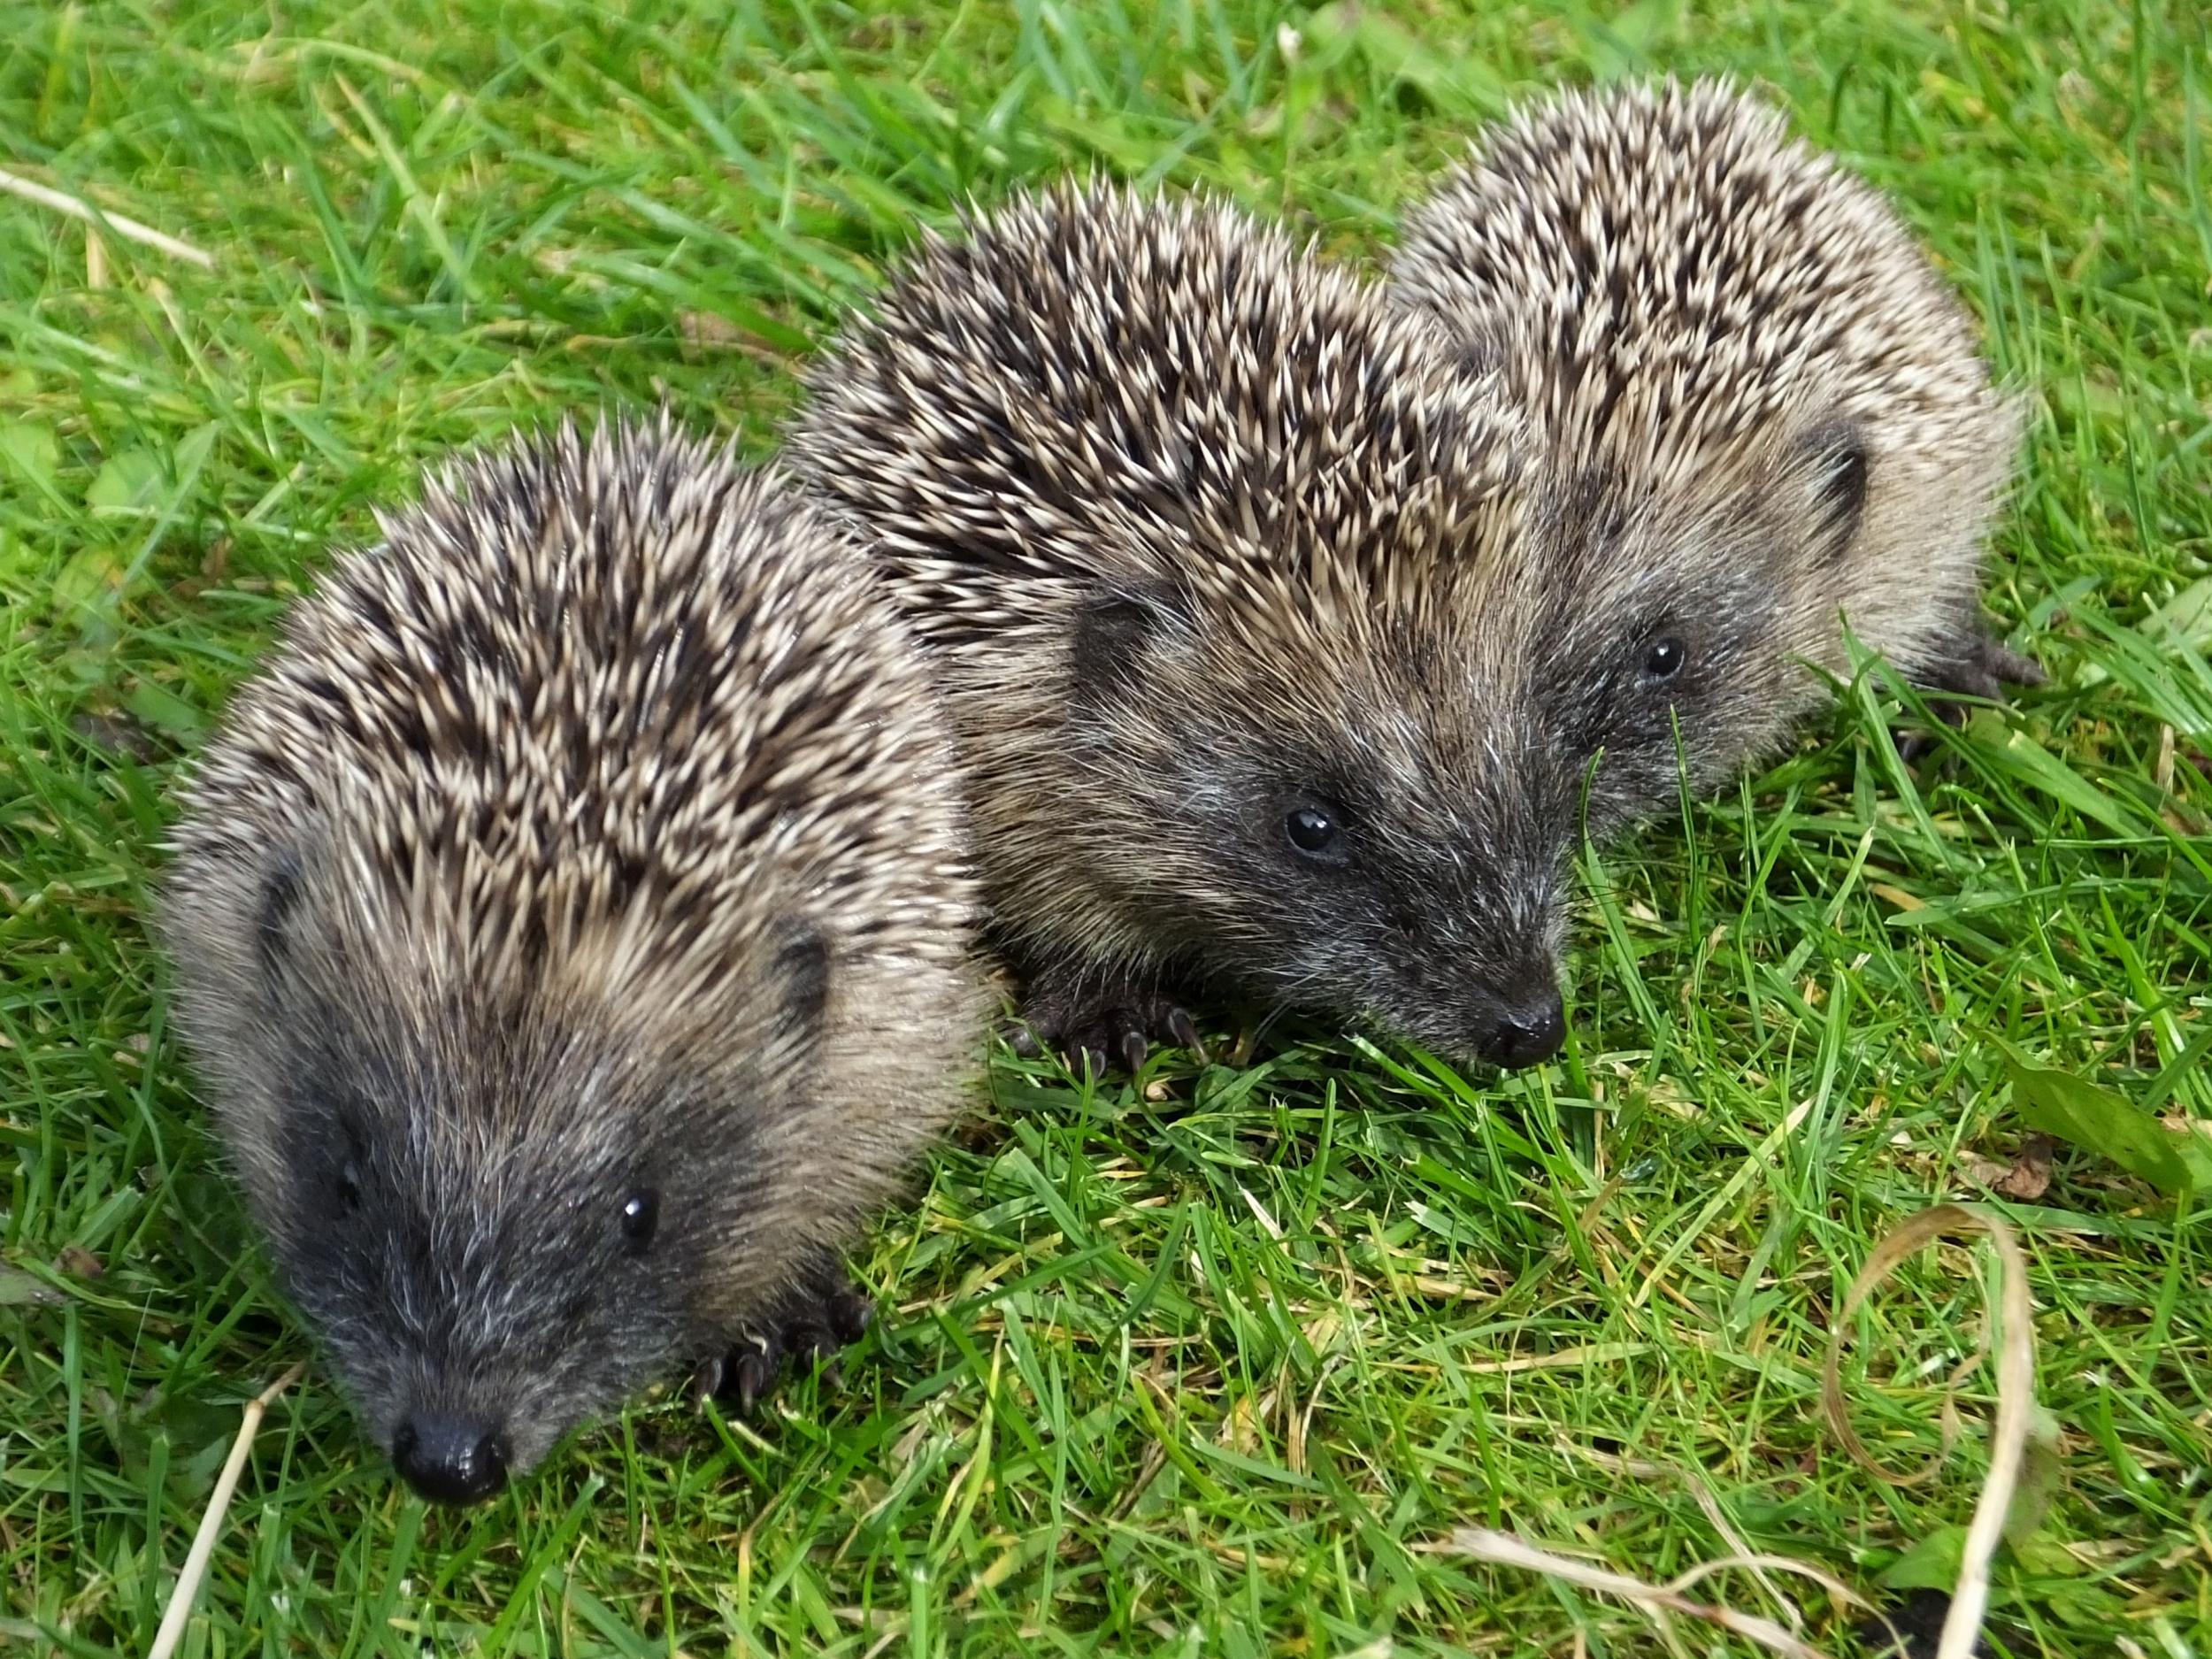 Hedgehog populations have collapsed in recent decades due largely to pesticide use and modern garden design